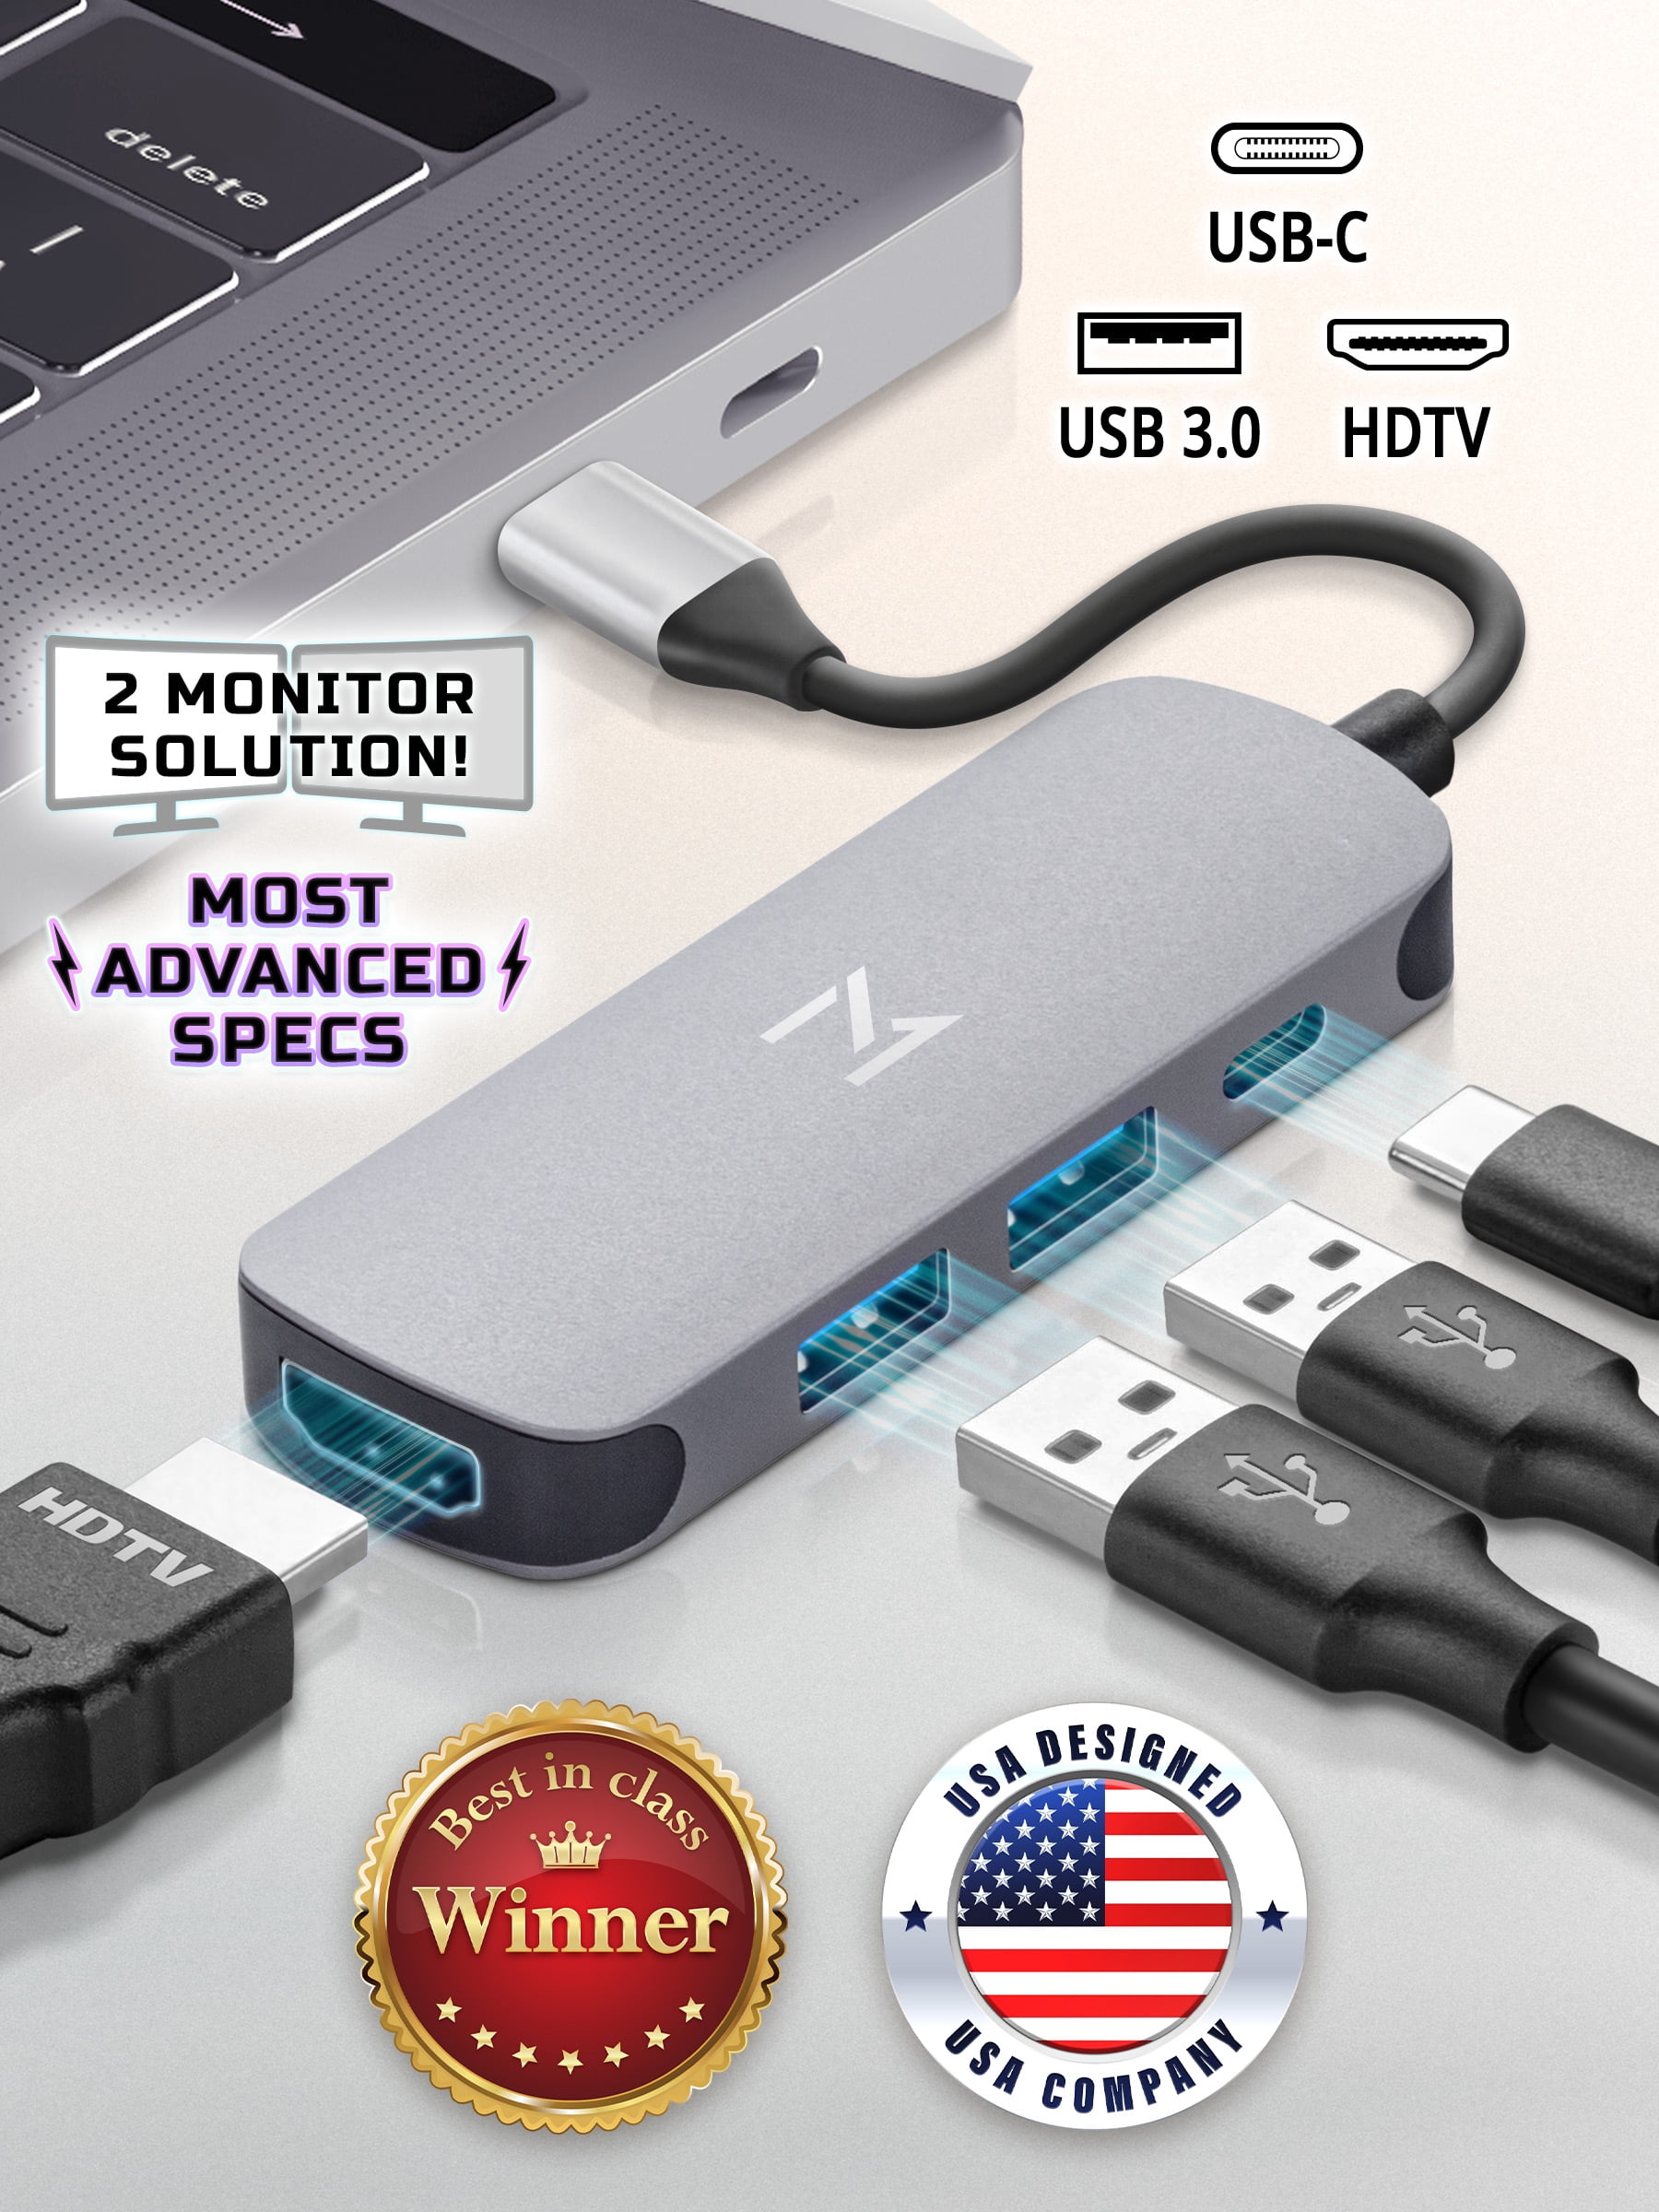 BENFEI USB C HUB 4in1, USB Type-C to HDMI VGA Adapter Review 